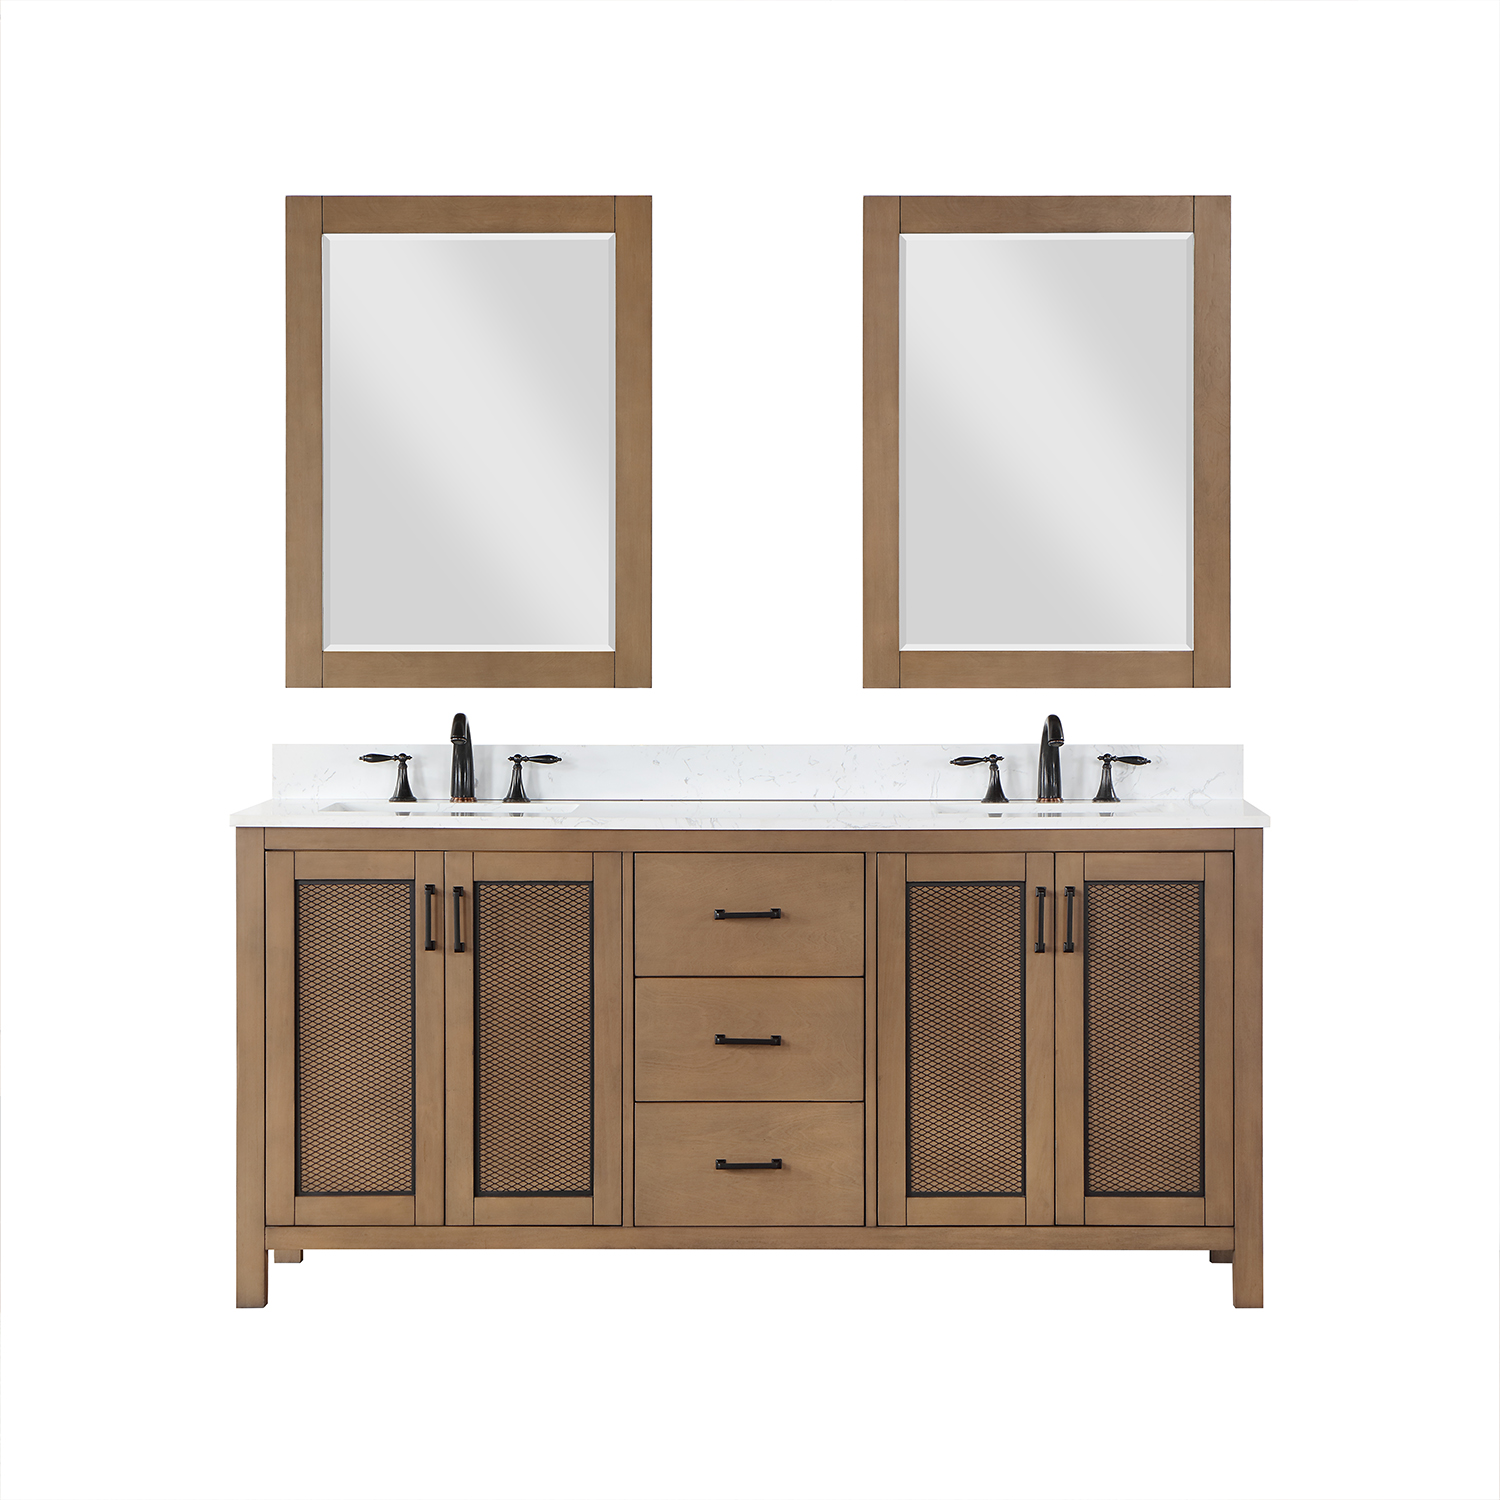 Issac Edwards Collection 72" Double Bathroom Vanity Set in Brown Pine with Carrara White Composite Stone Countertop without Mirror 